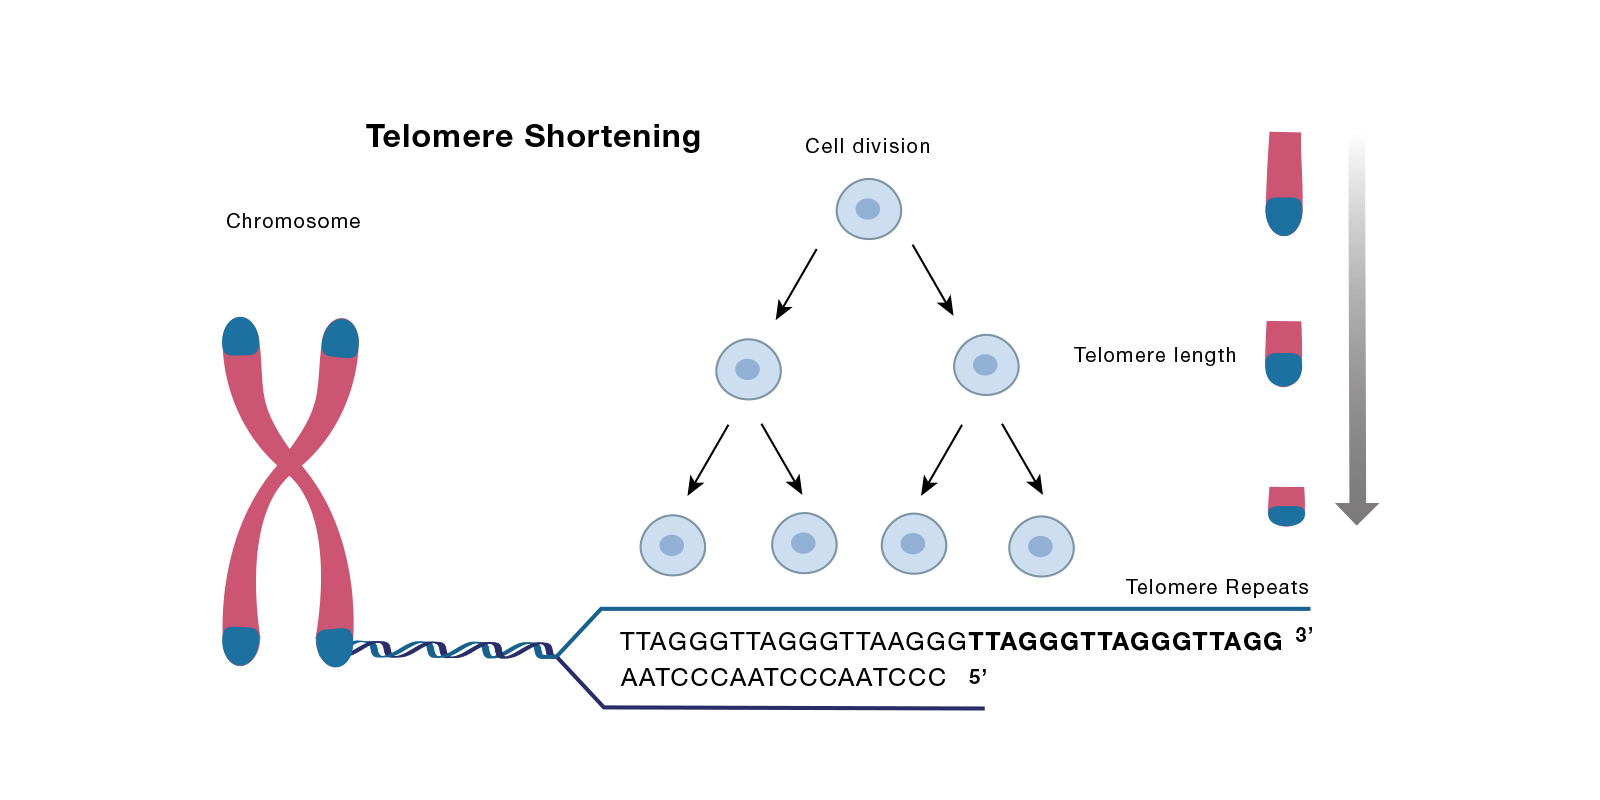 Cell Process: What role do the telomeres play in senescence?